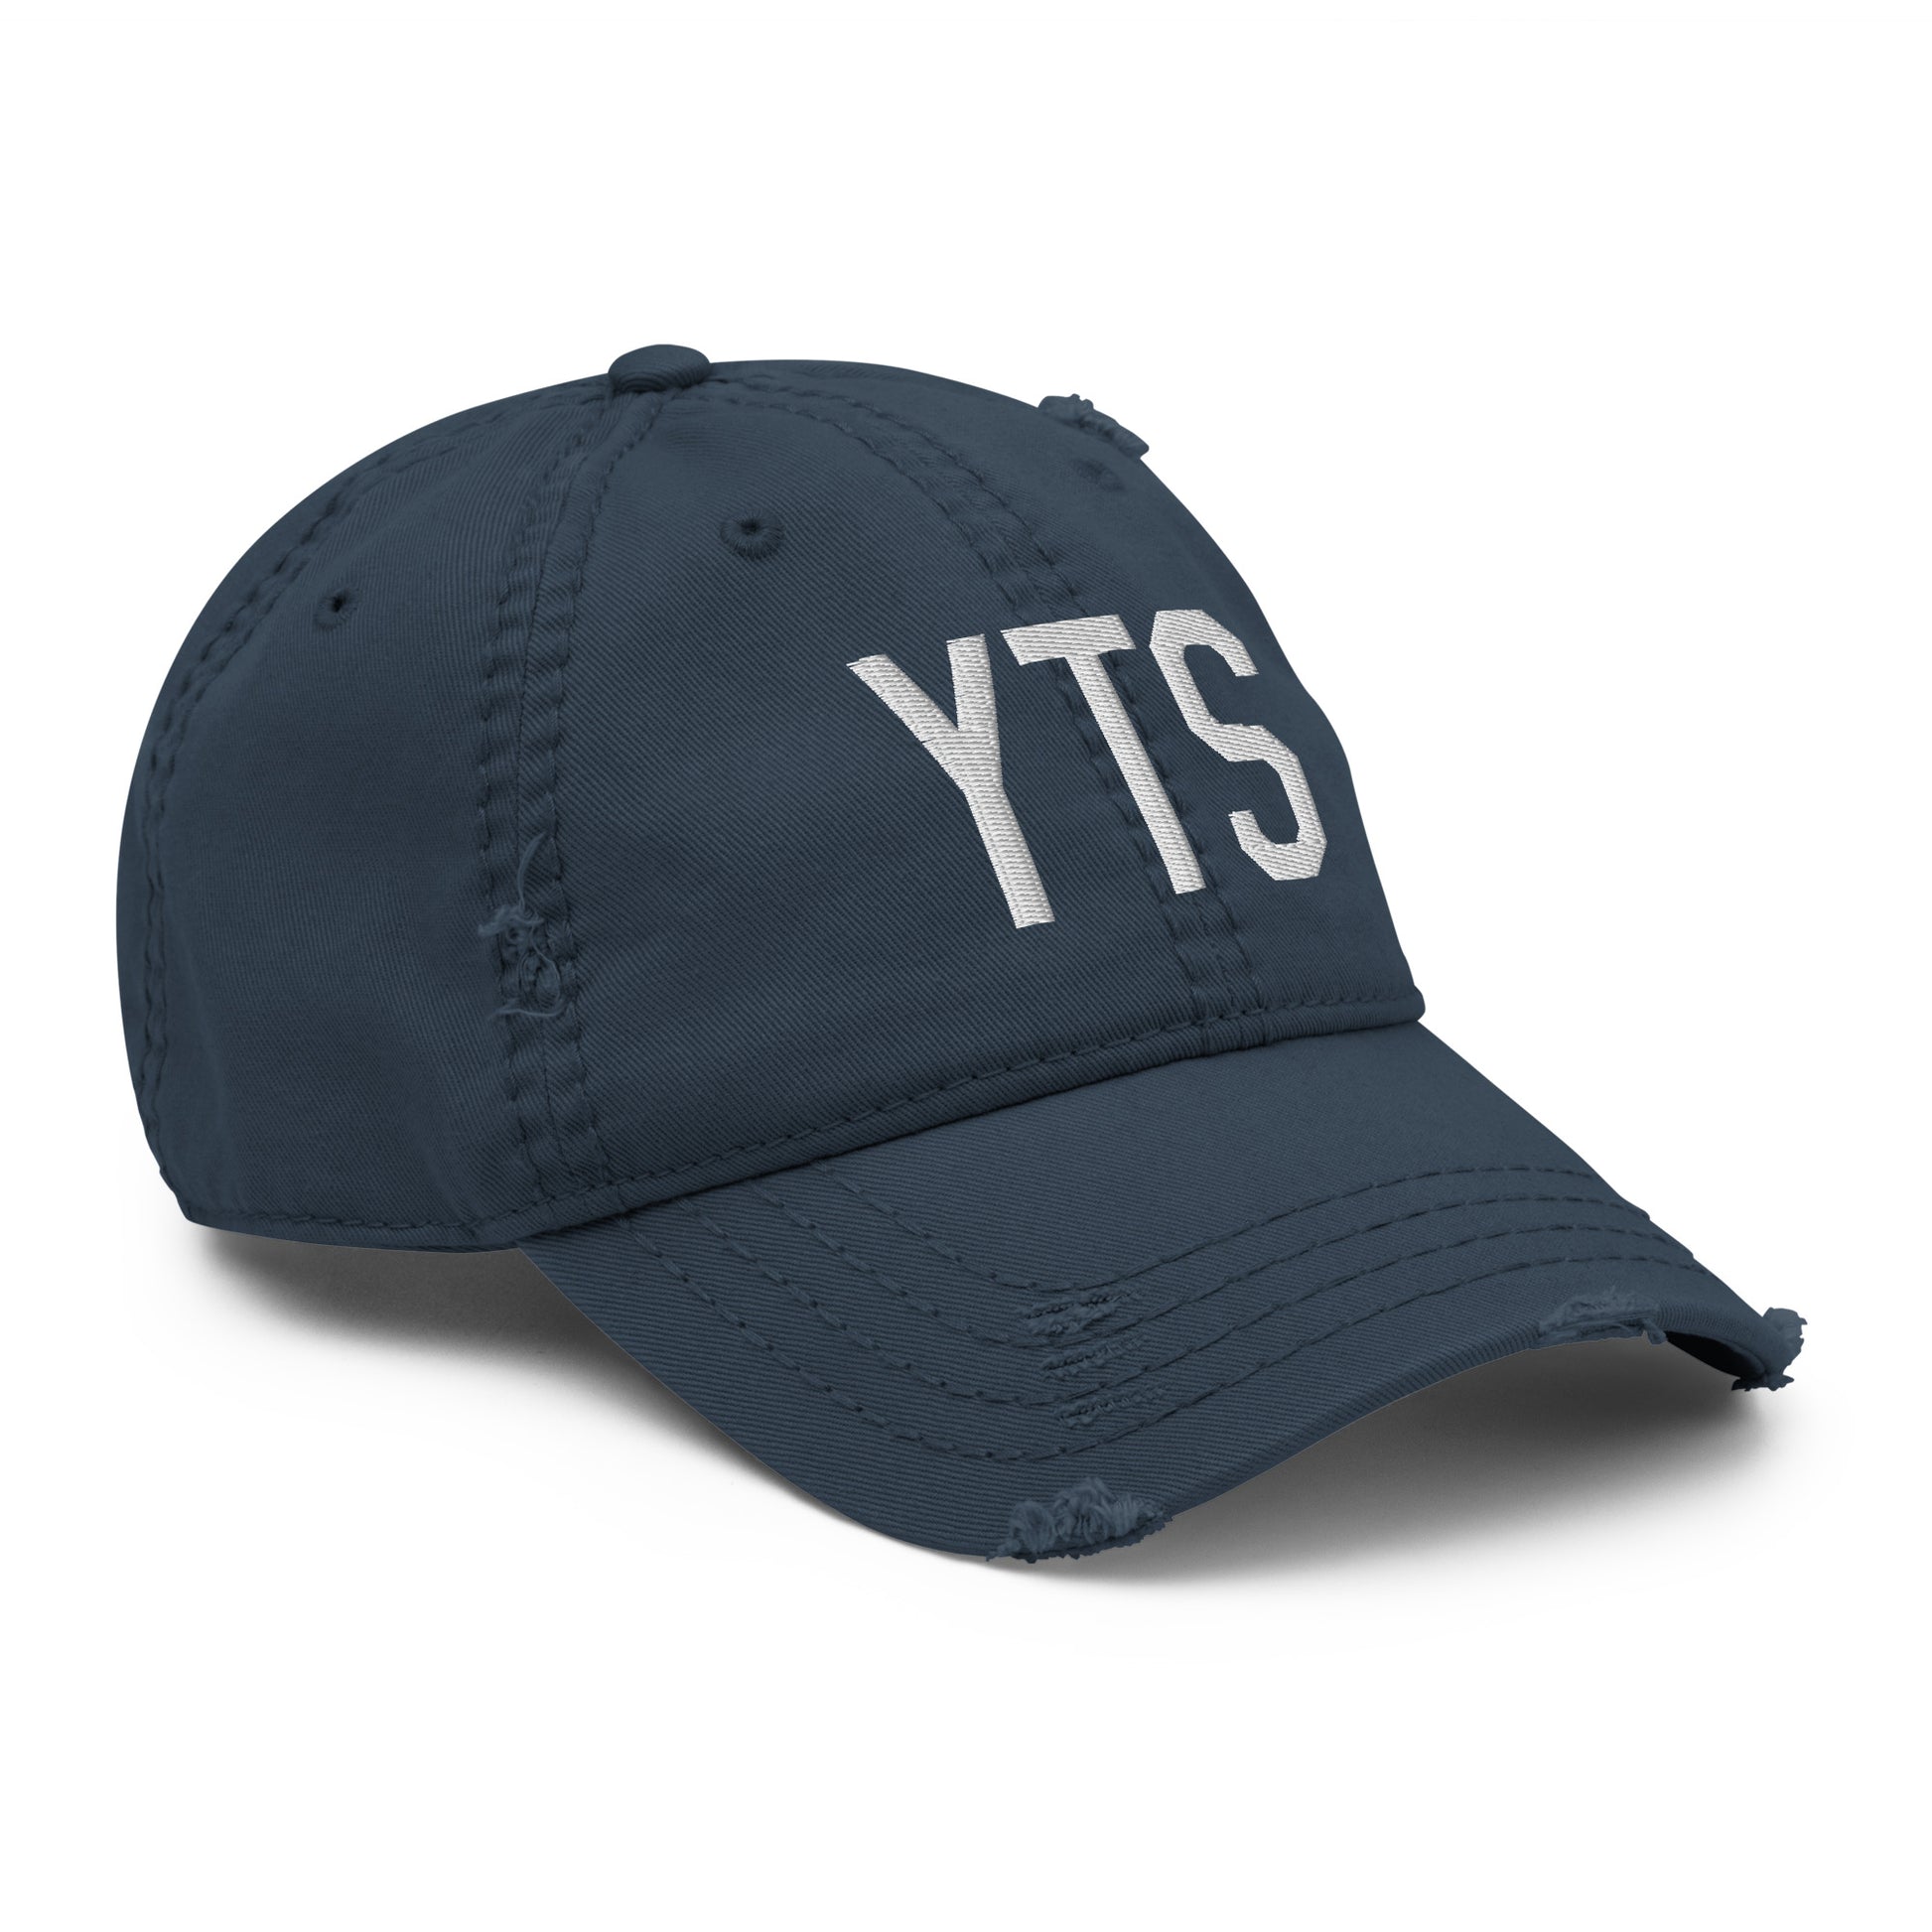 Airport Code Distressed Hat - White • YTS Timmins • YHM Designs - Image 14